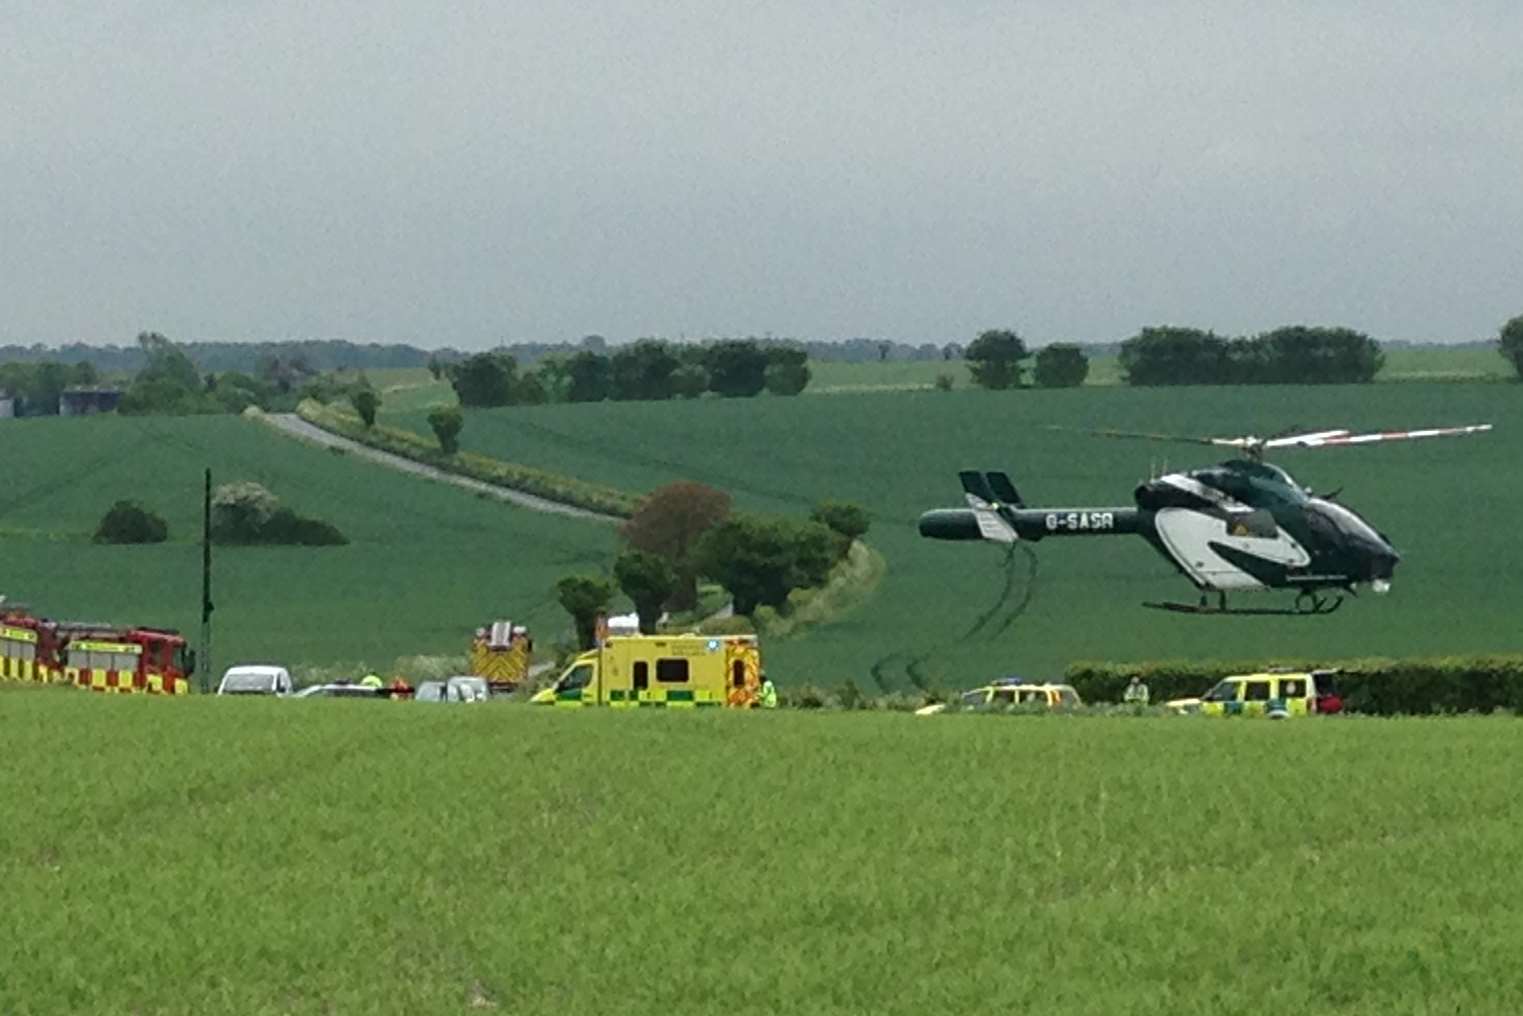 The air ambulance taking off from the scene of this morning's crash at Adisham Road.